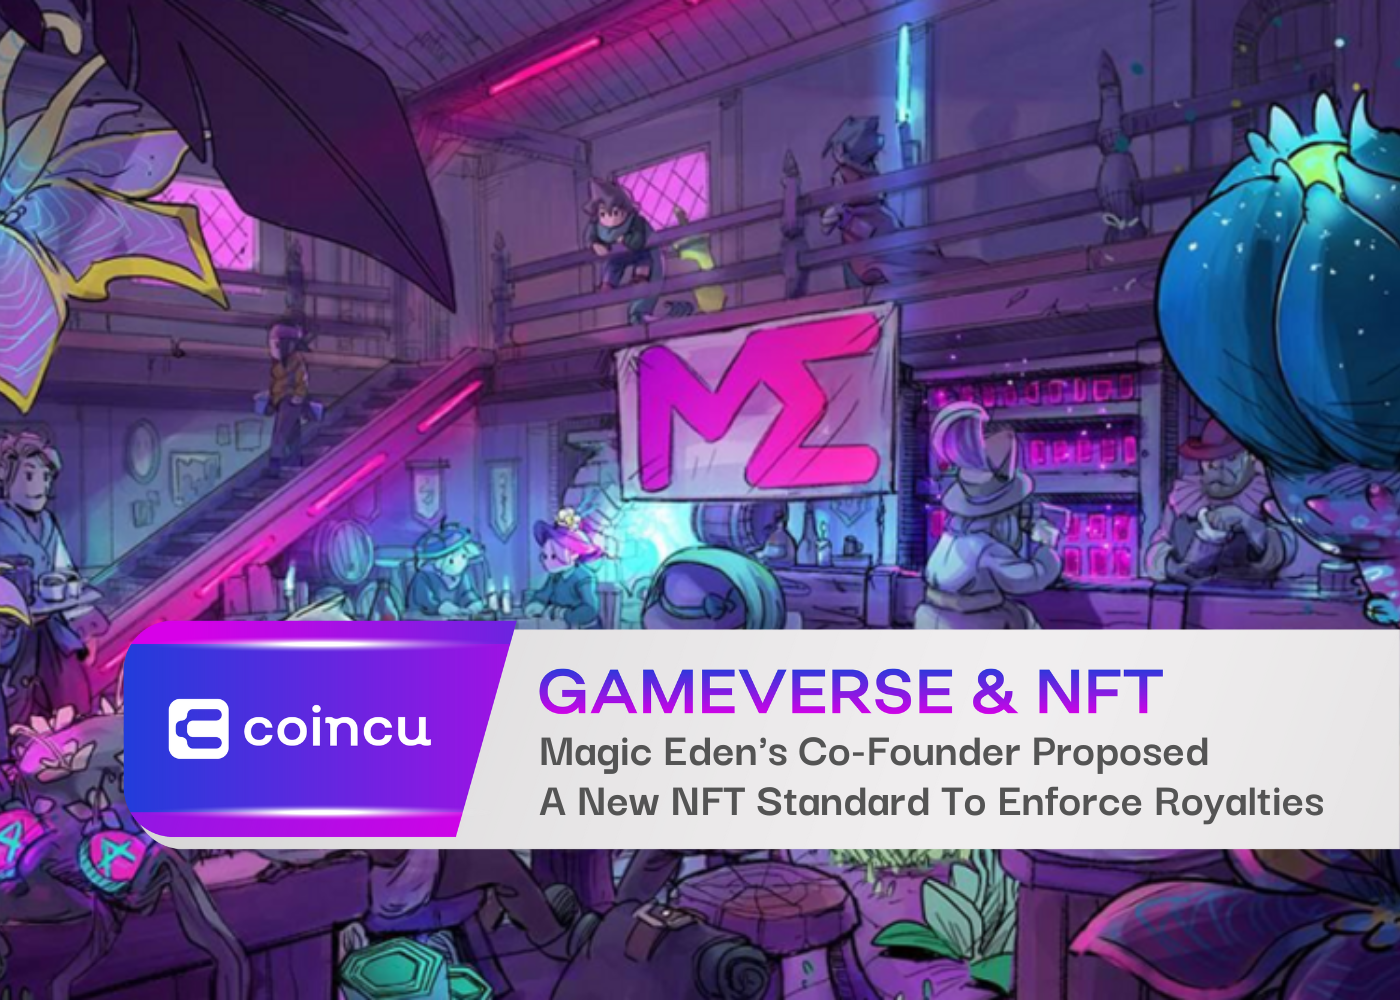 Magic Eden's Co-Founder Proposed A New NFT Standard To Enforce Royalties